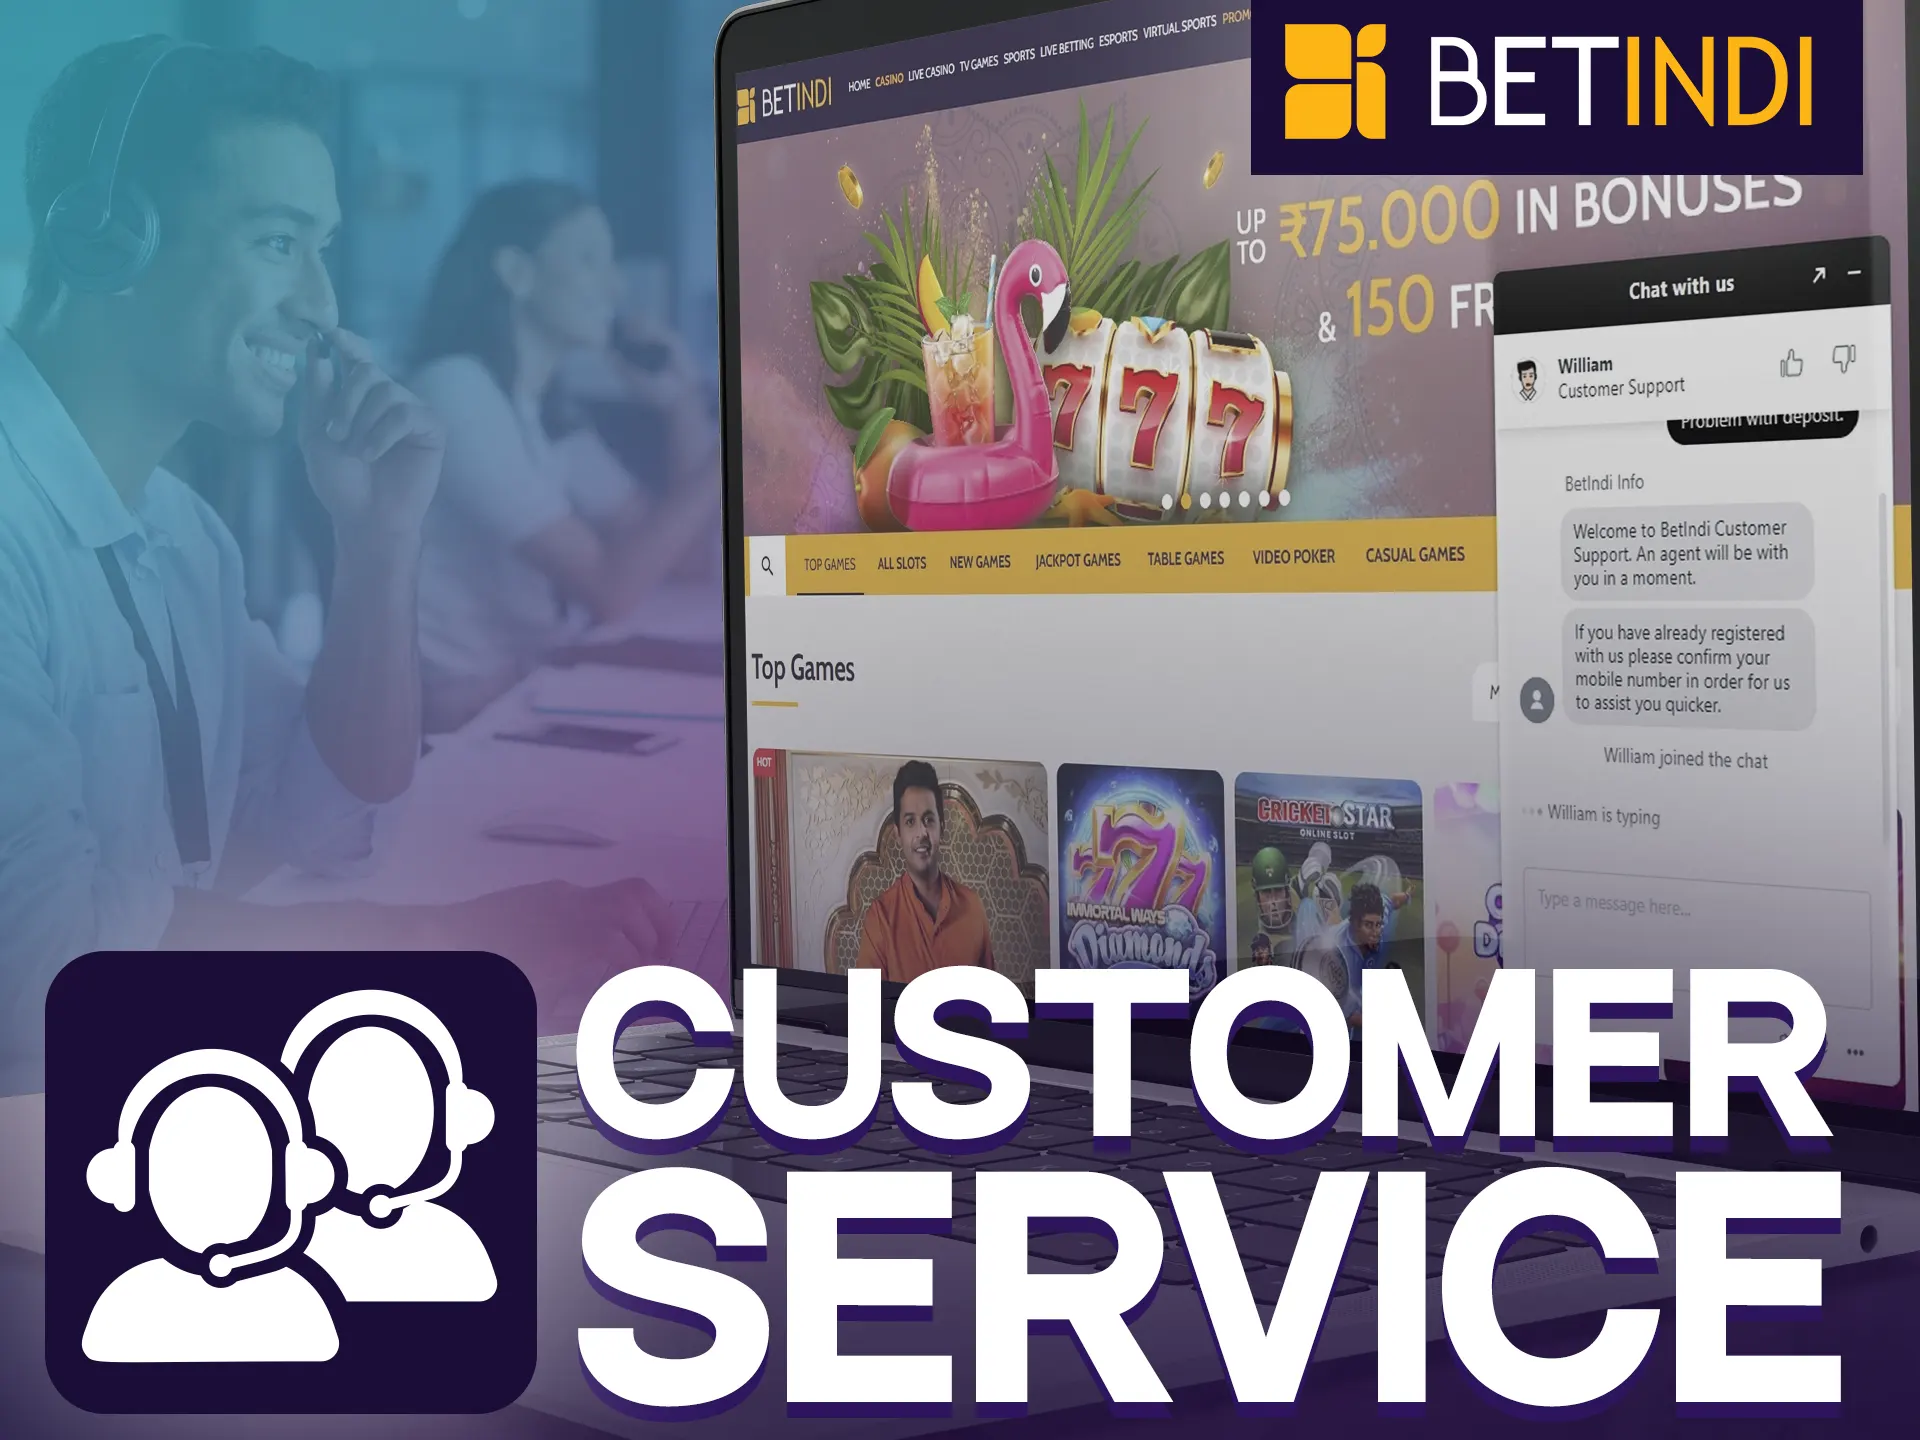 Betindi's customer service is available 24/7.